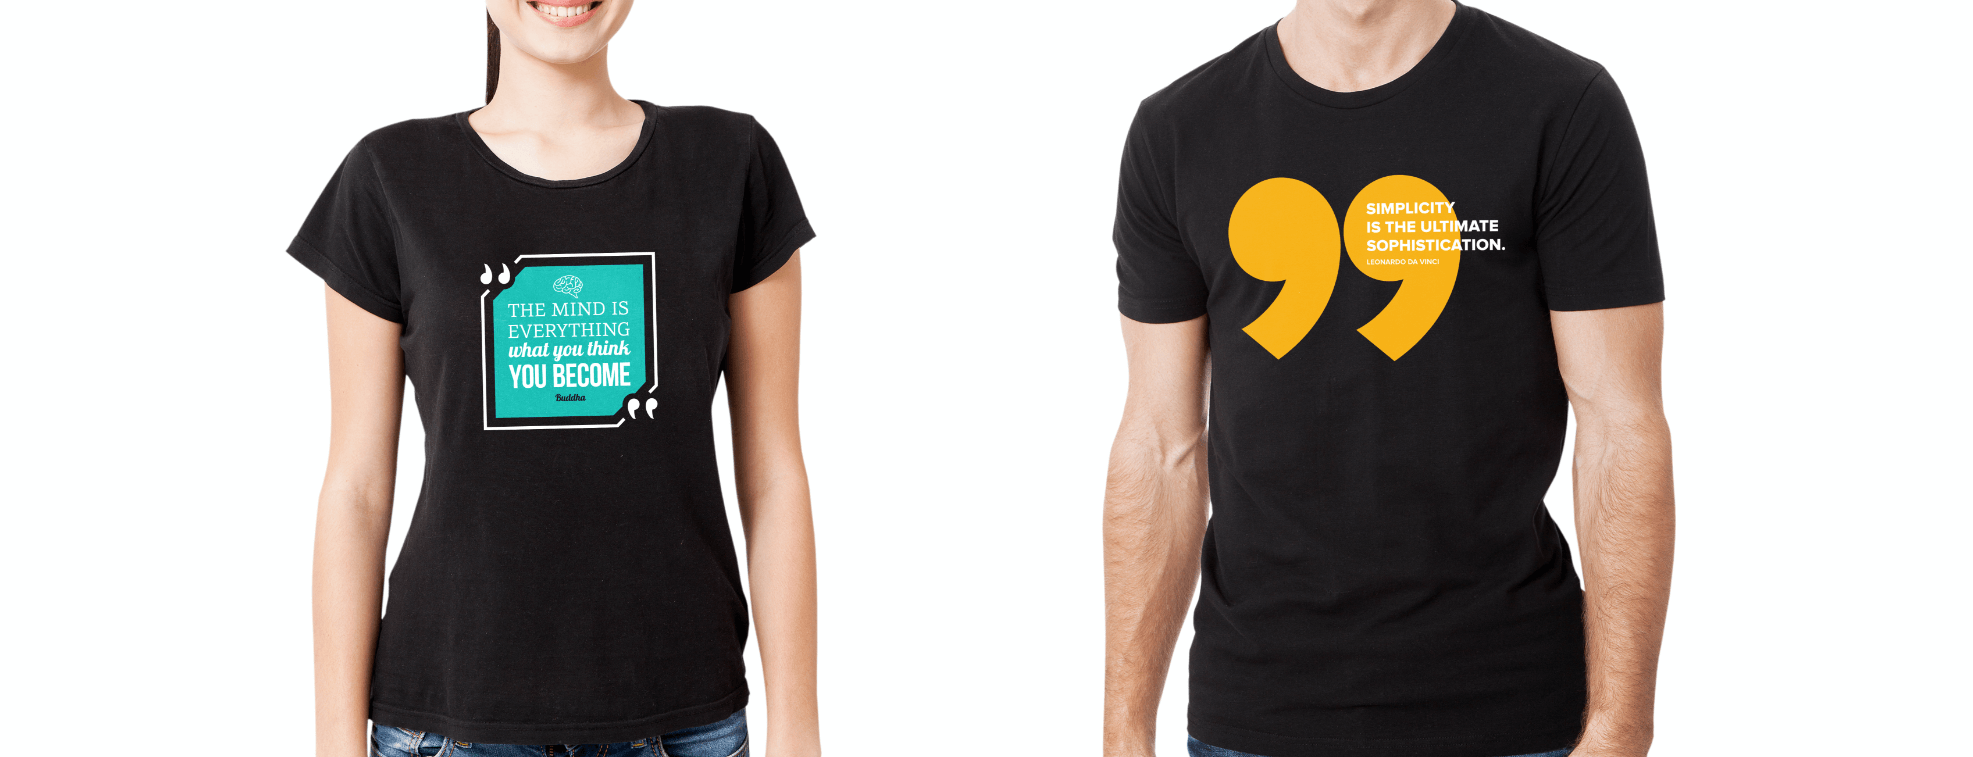 Female and male t-shirts with inspirational quotes